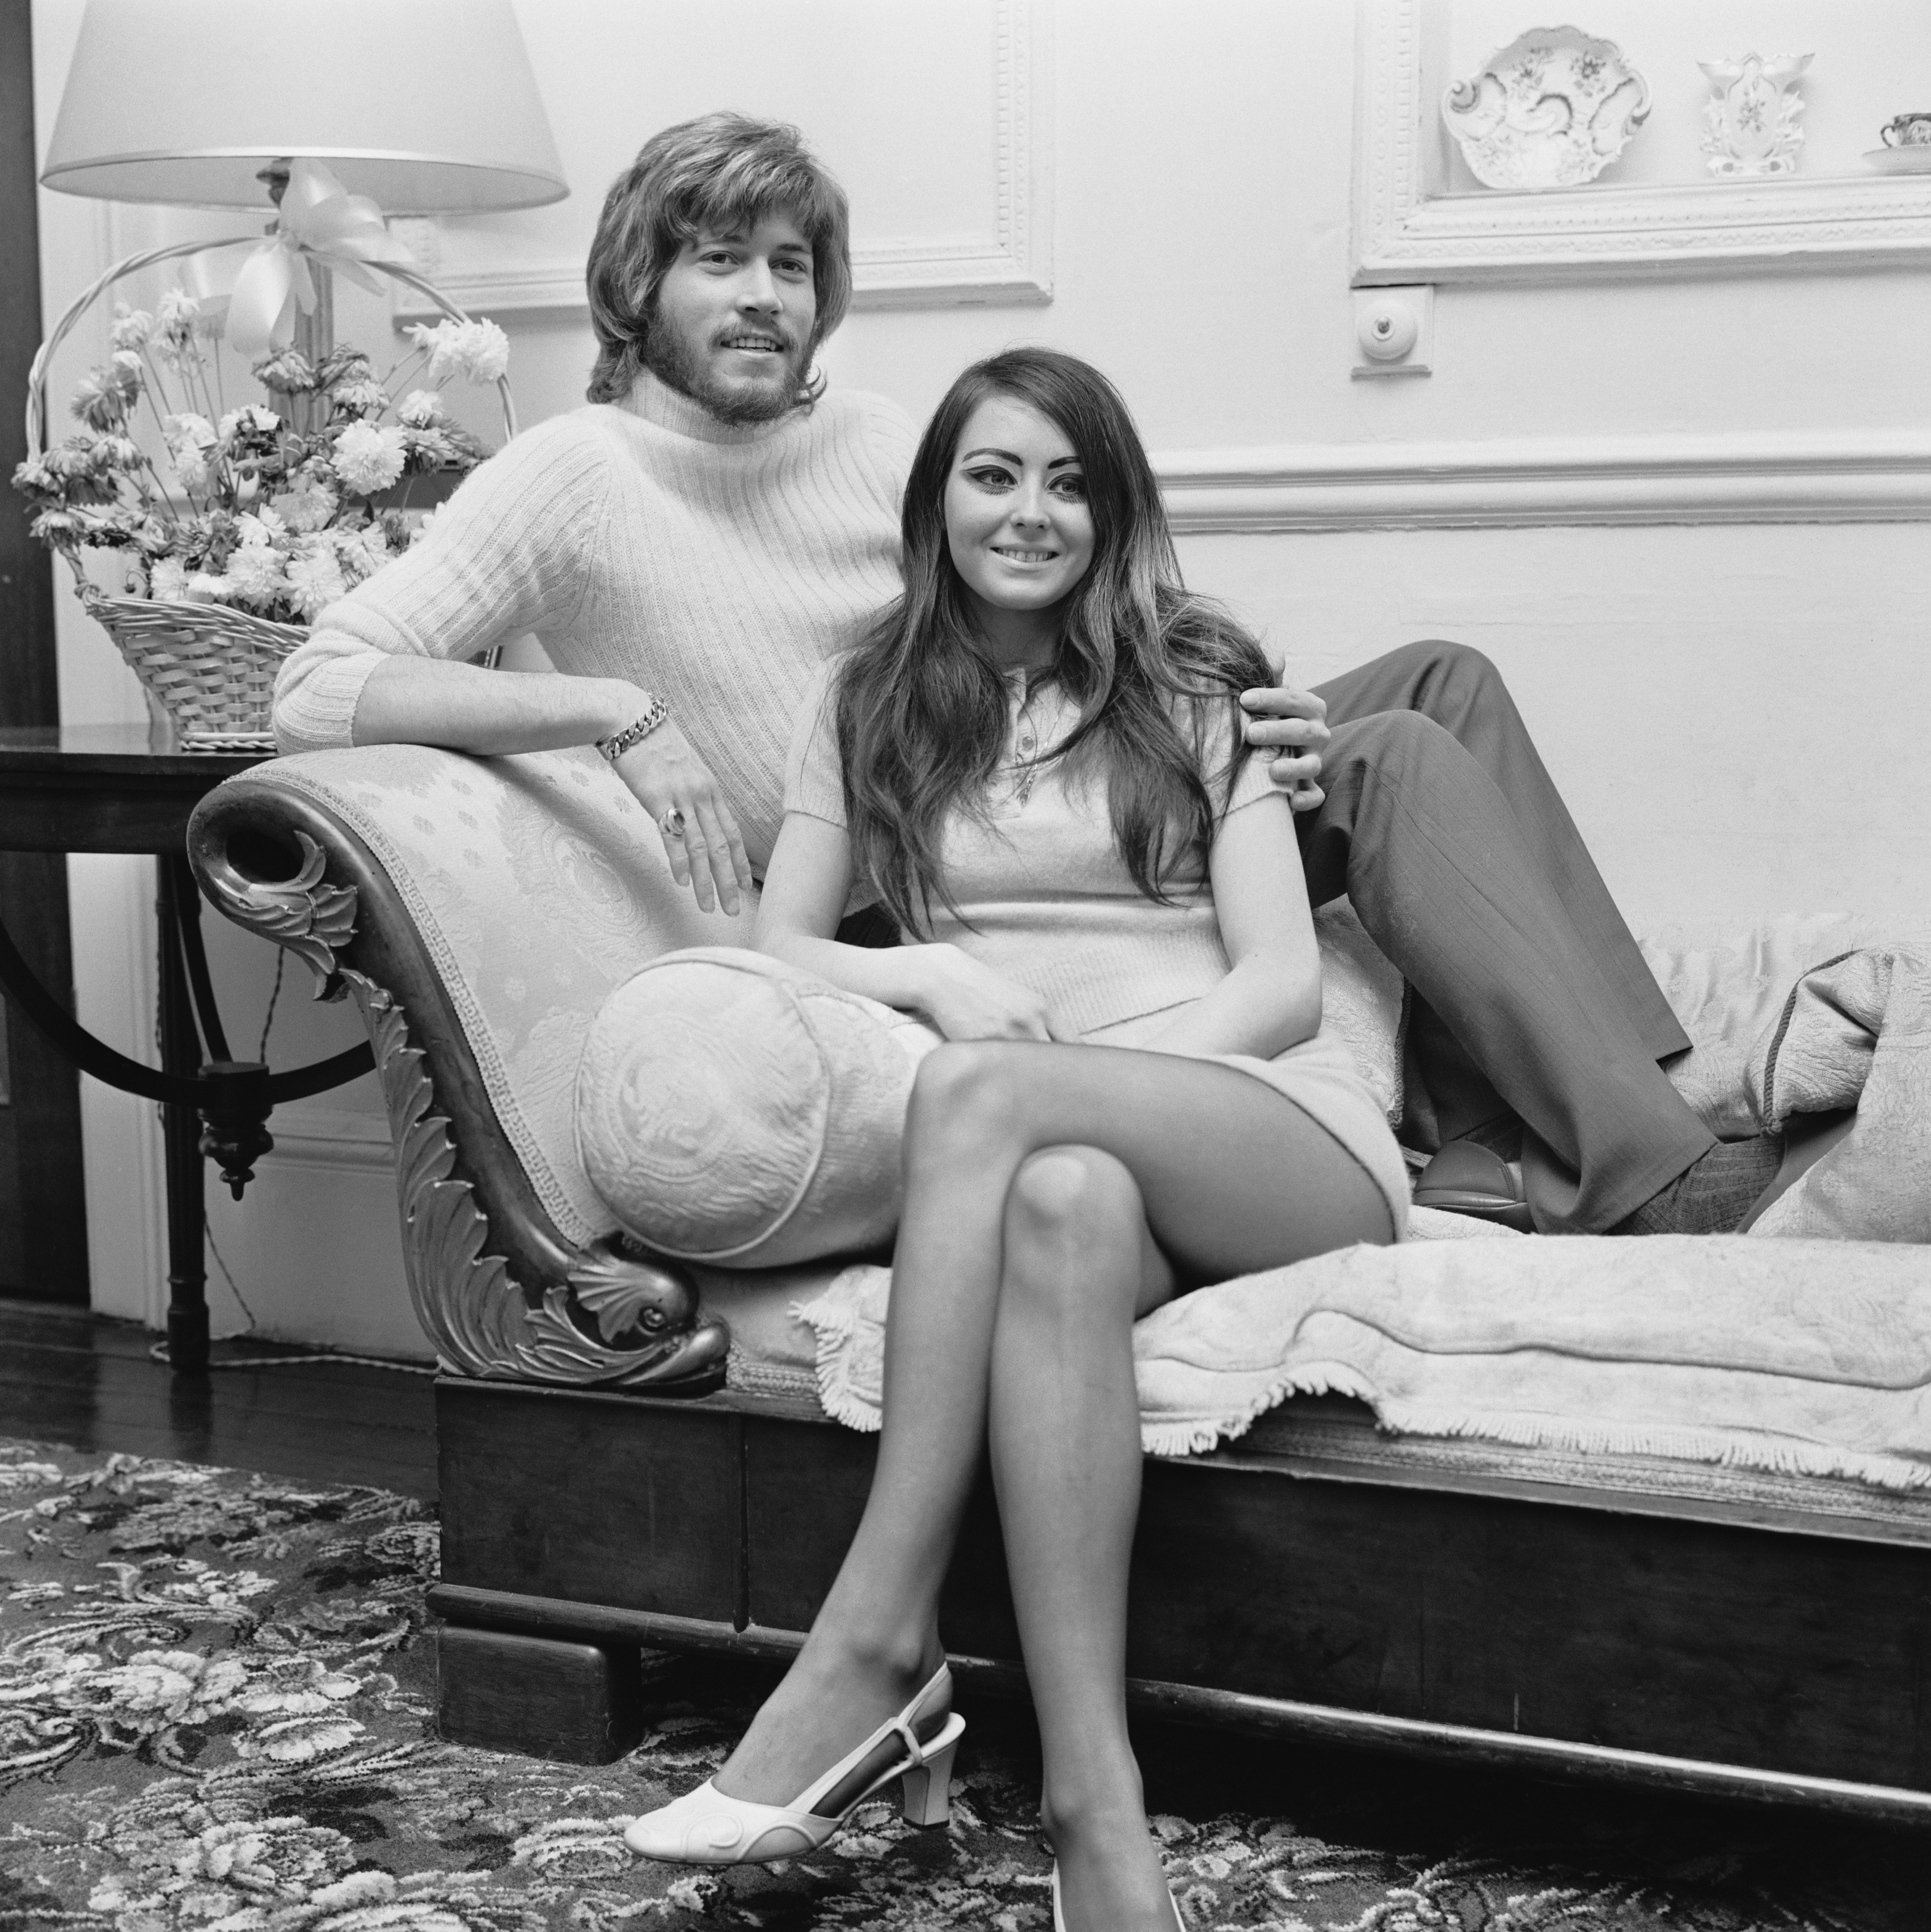 Barry Gibb and Linda Gray in a black and white photograph in the United Kingdom, 1970 | Source: Getty Images